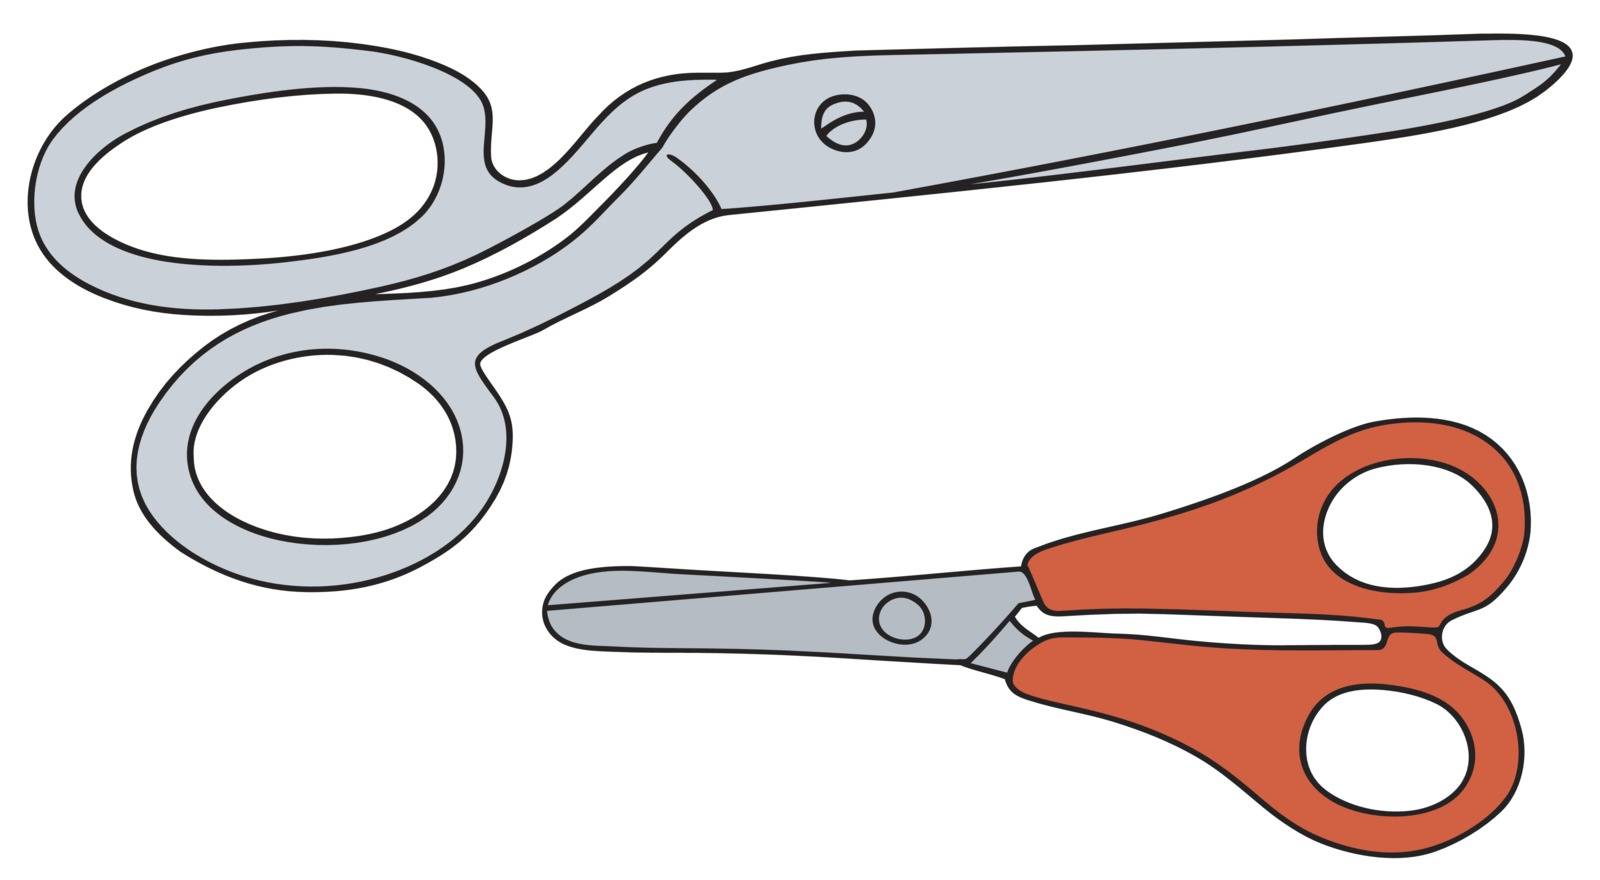 Big and small scissors by vostal